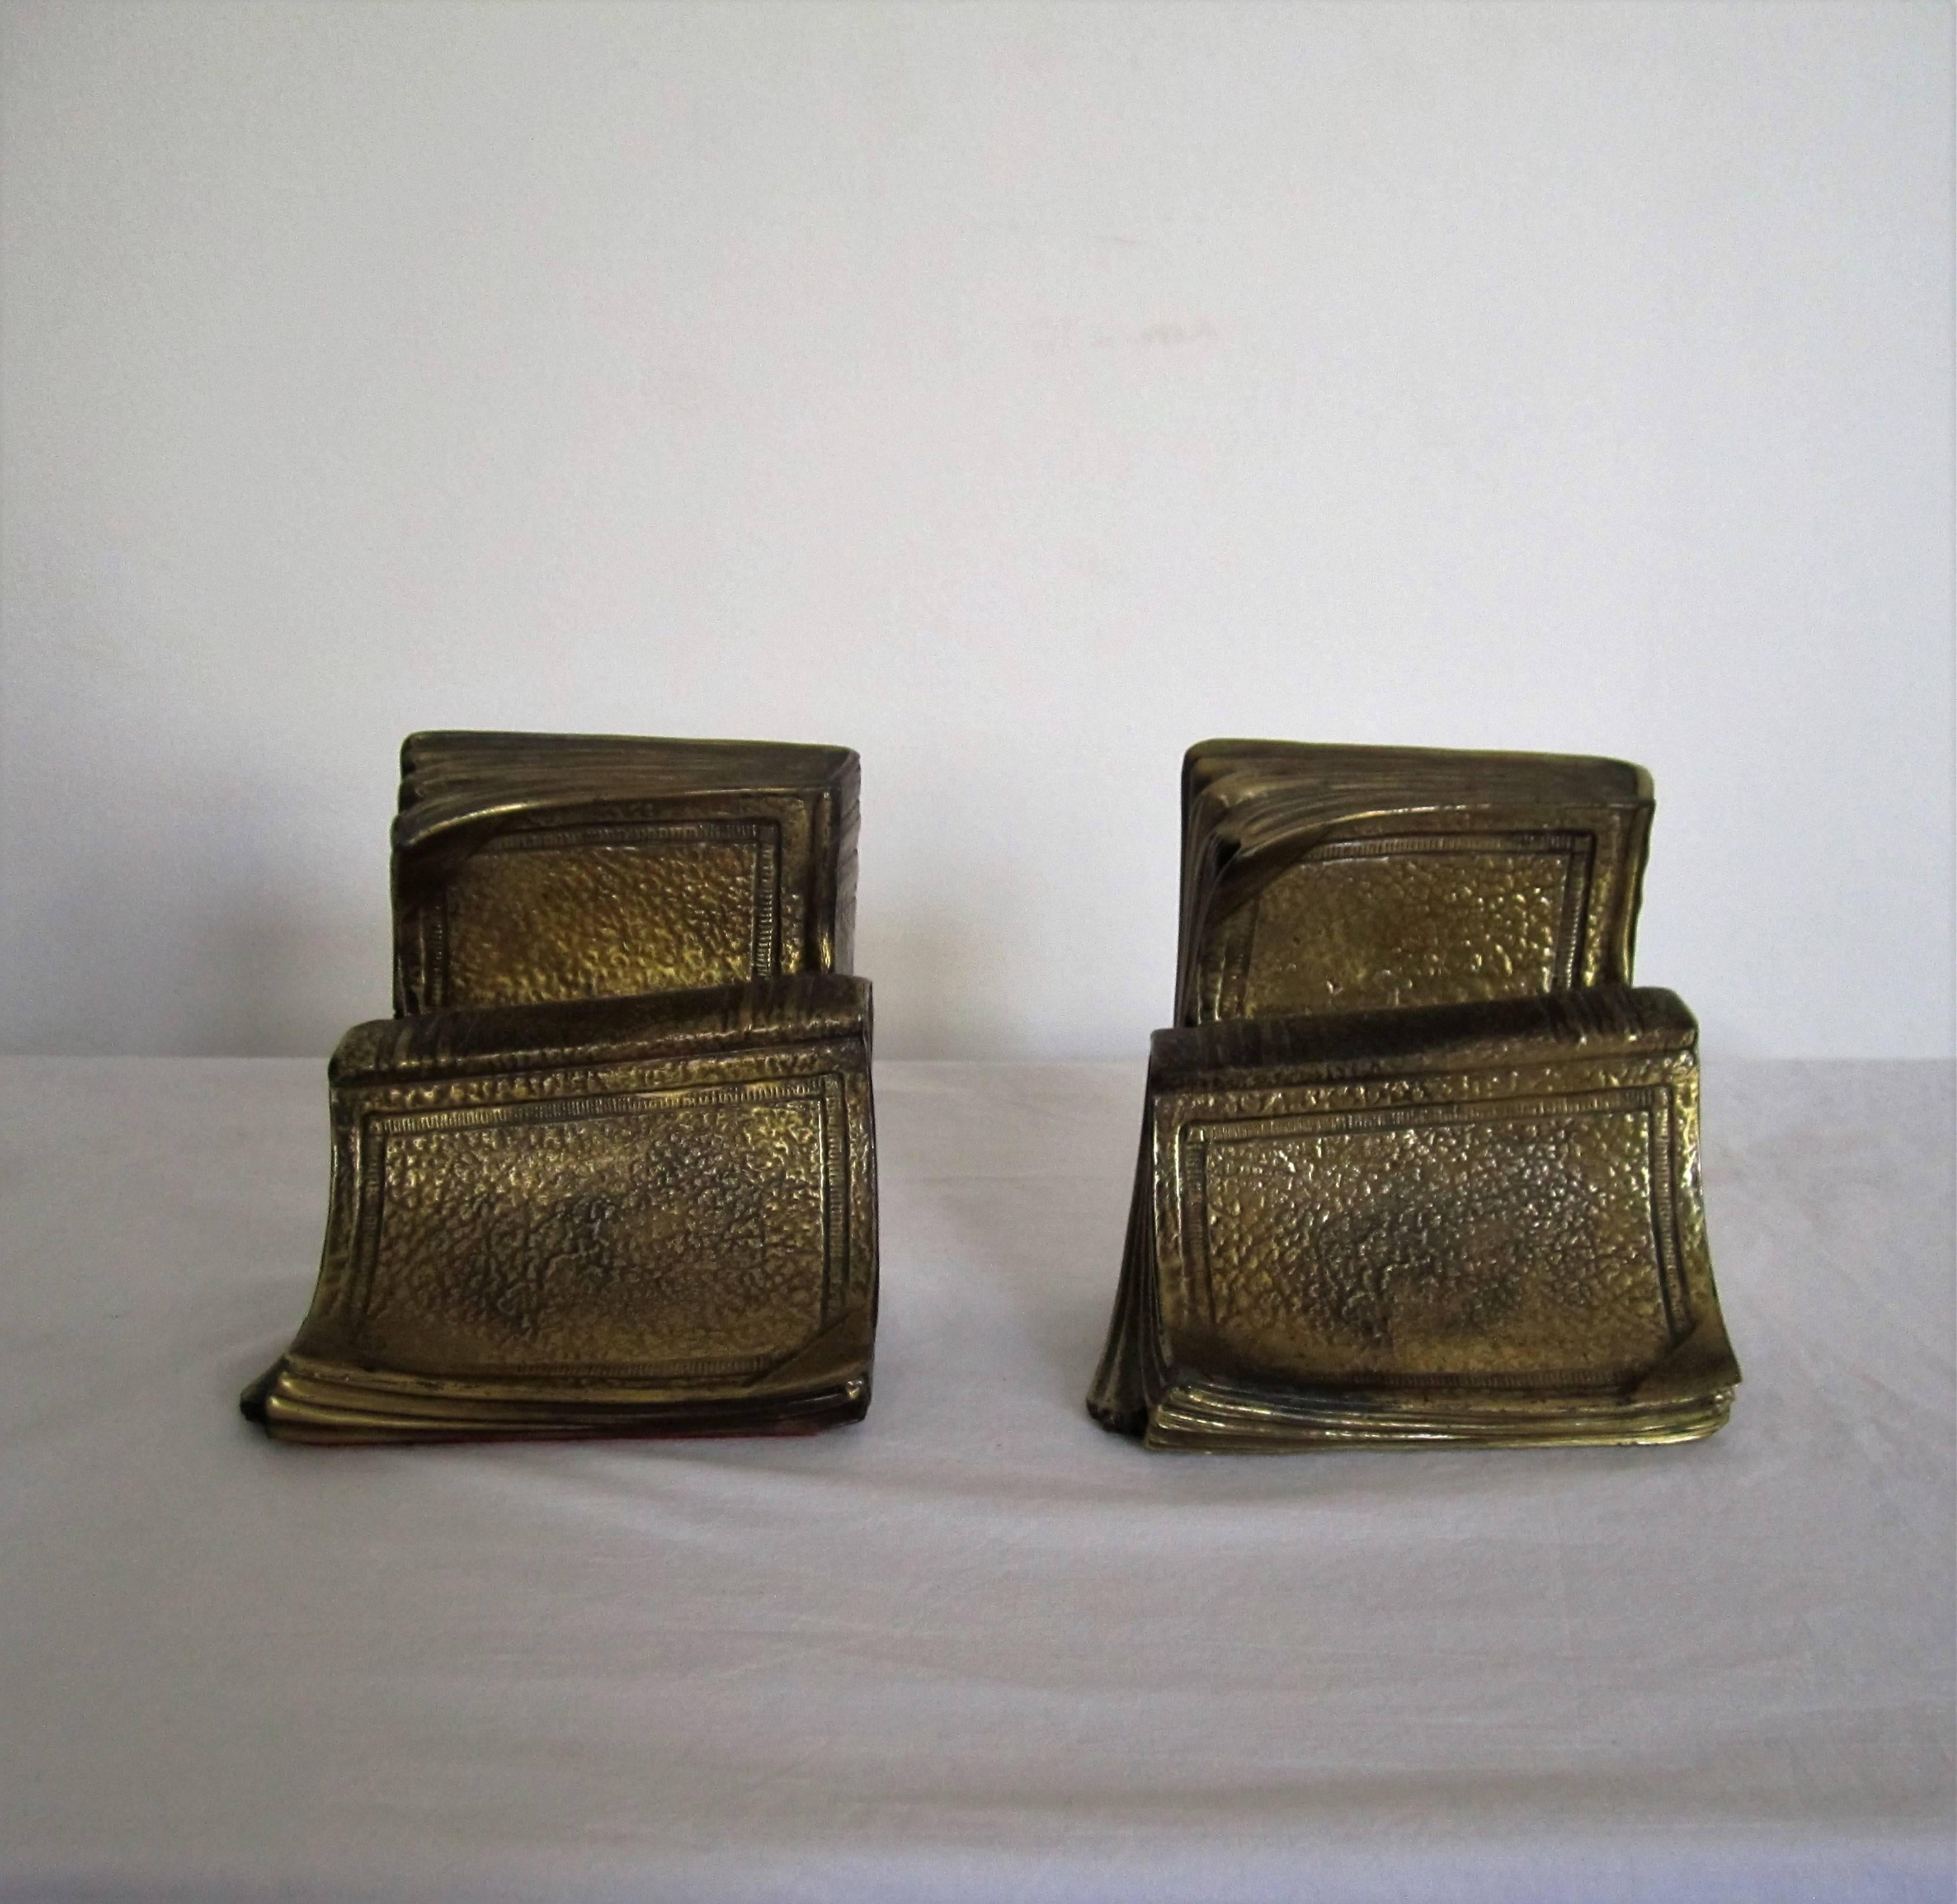 American Vintage Book Bookends in Gold